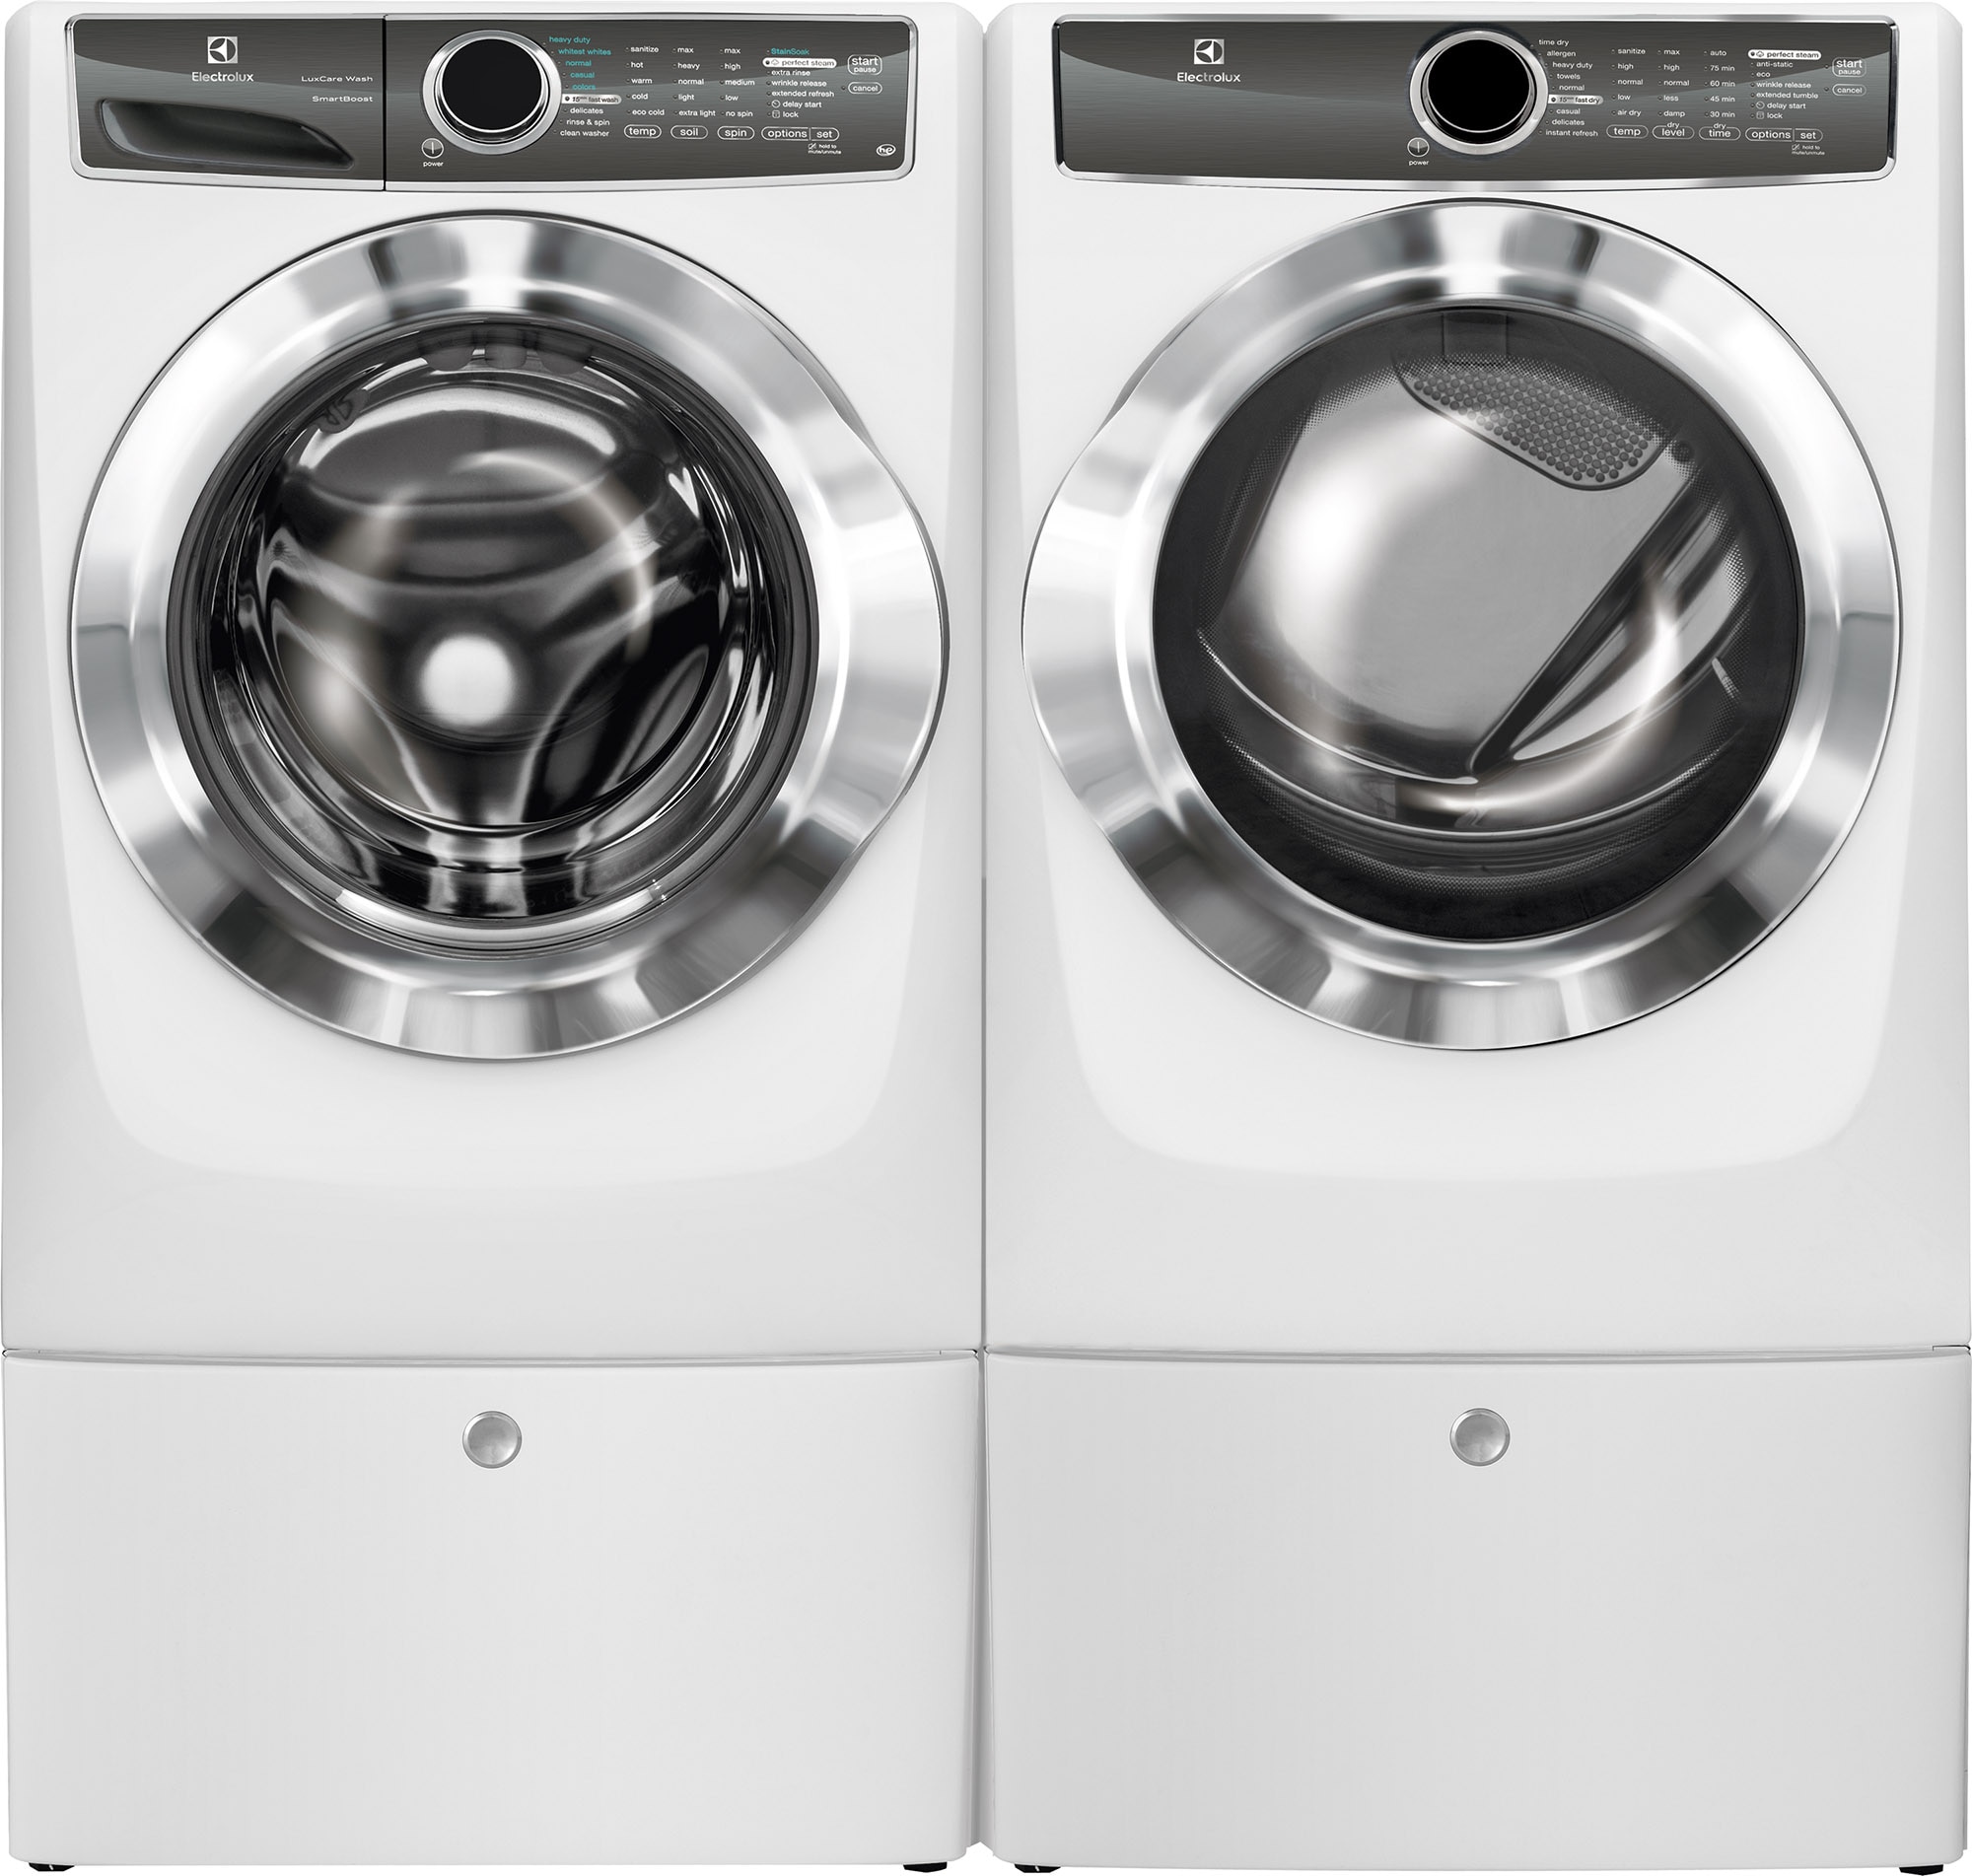 electrolux-washer-wins-best-in-show-at-u-s-trade-fair-kbis